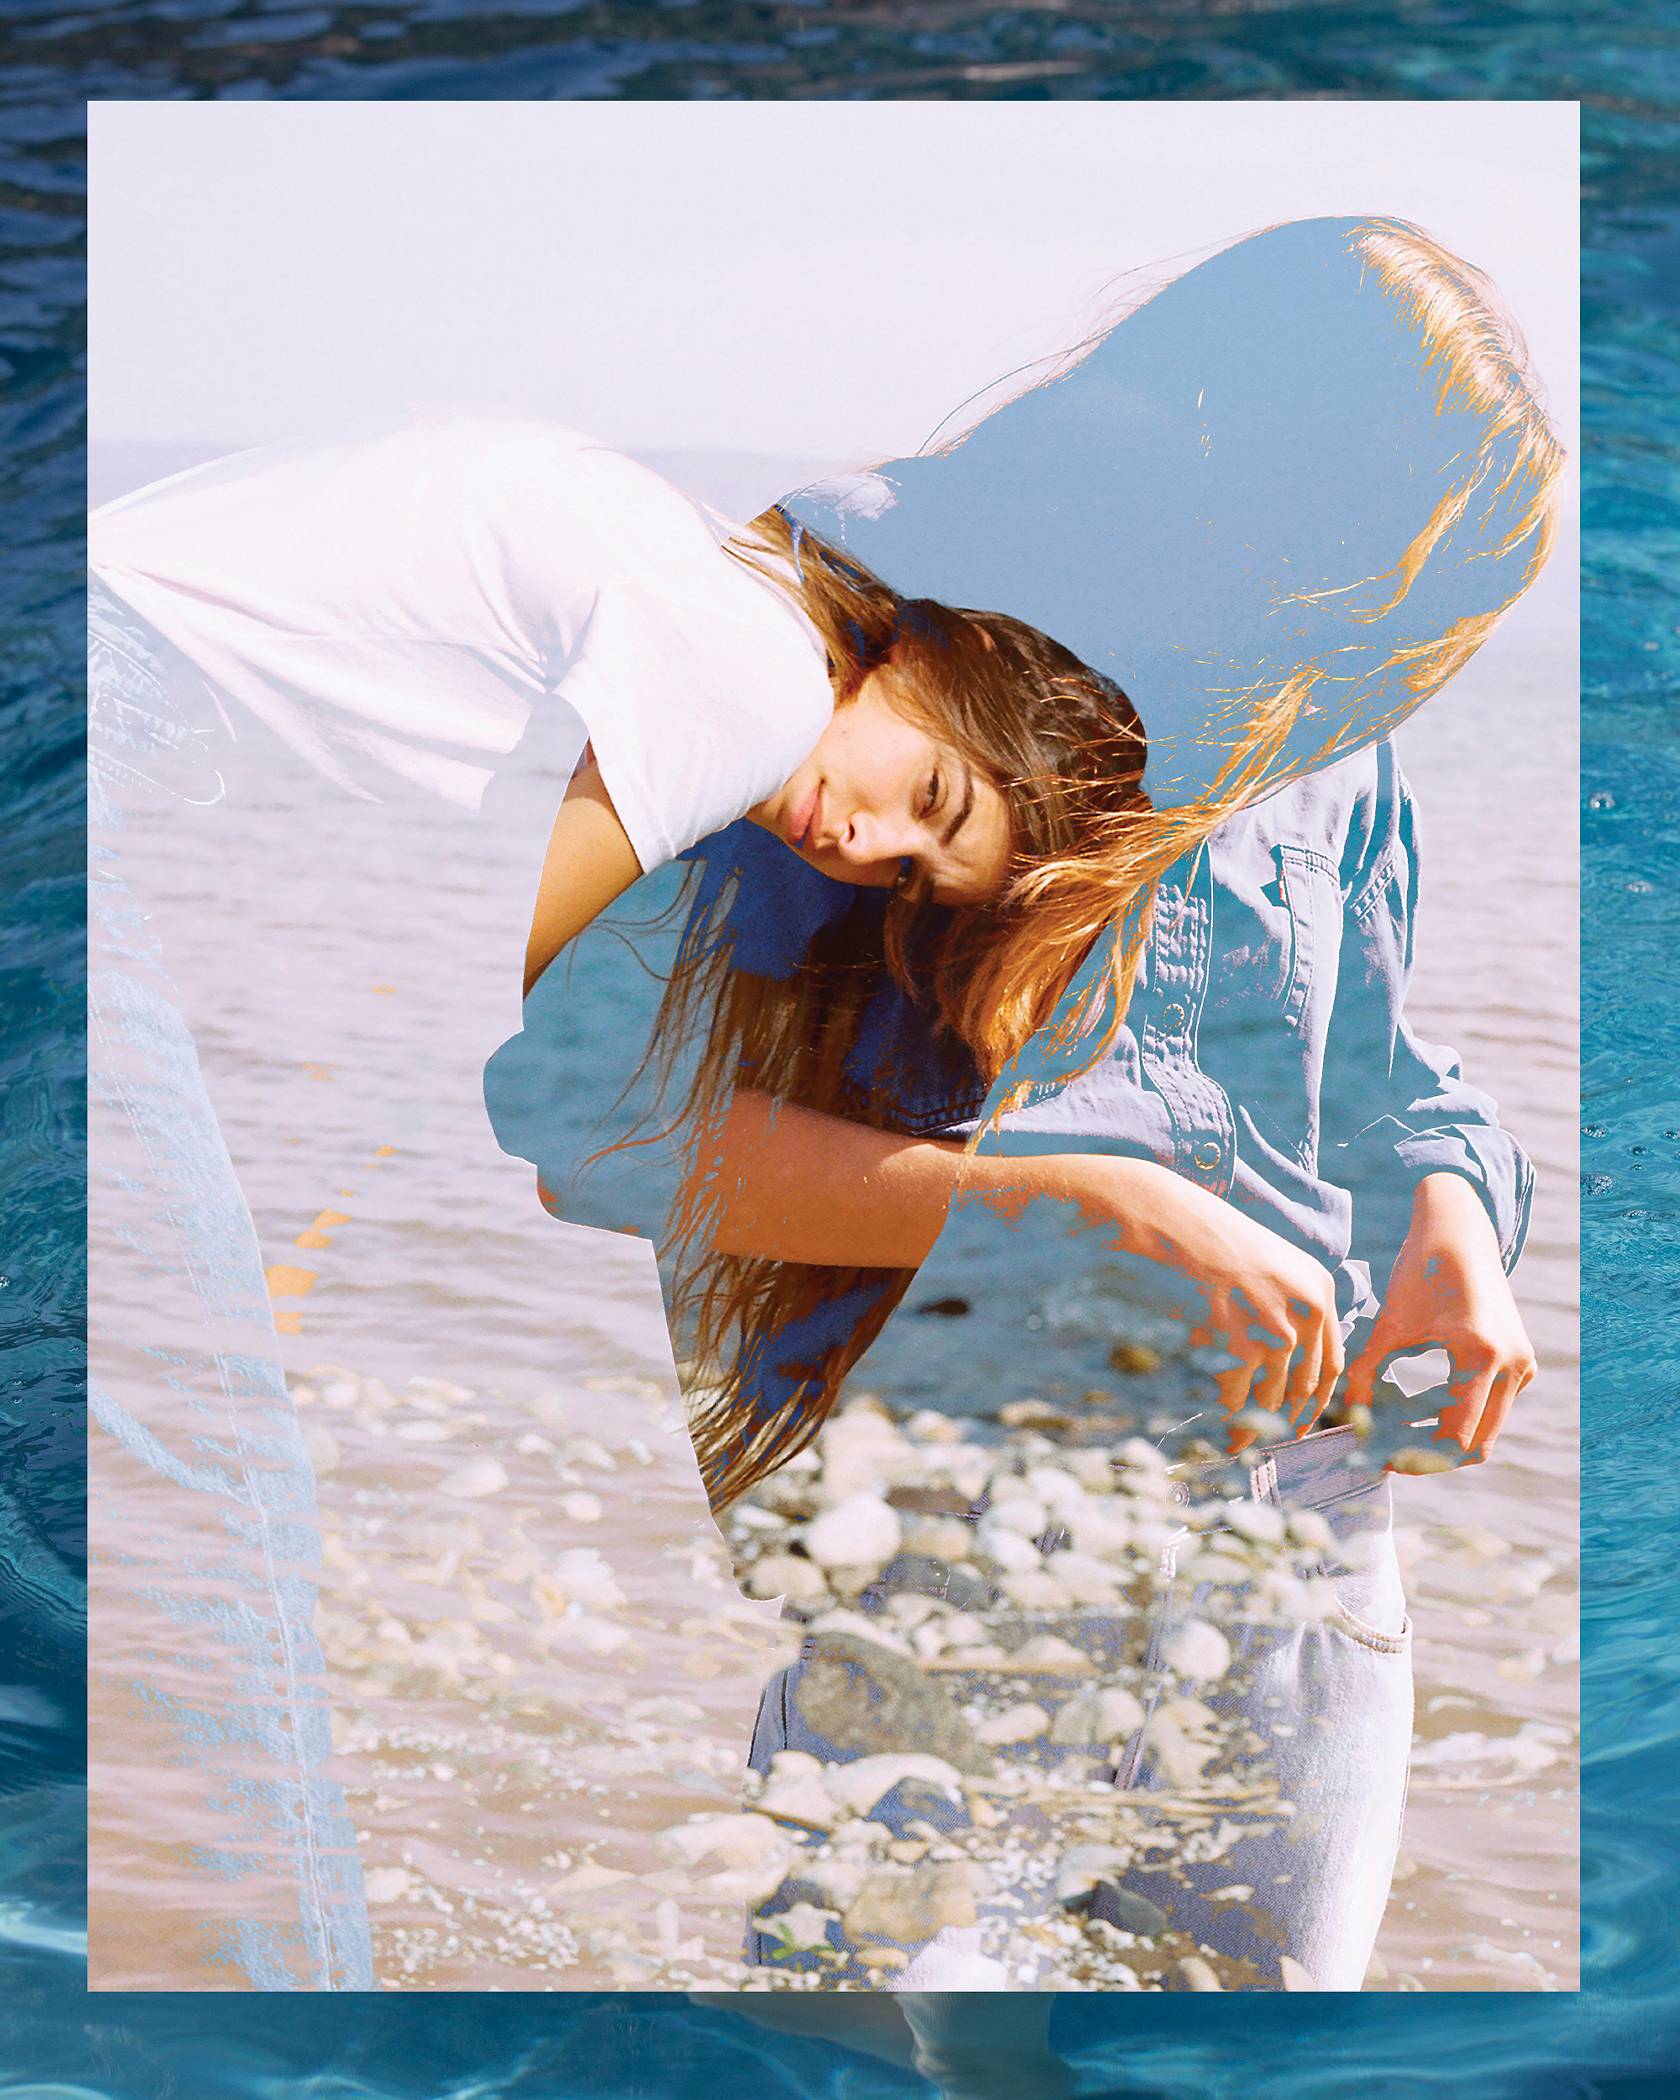 Women wearing a white tee and Levi's jeans standing in the ocean with her jeans cuffed up.